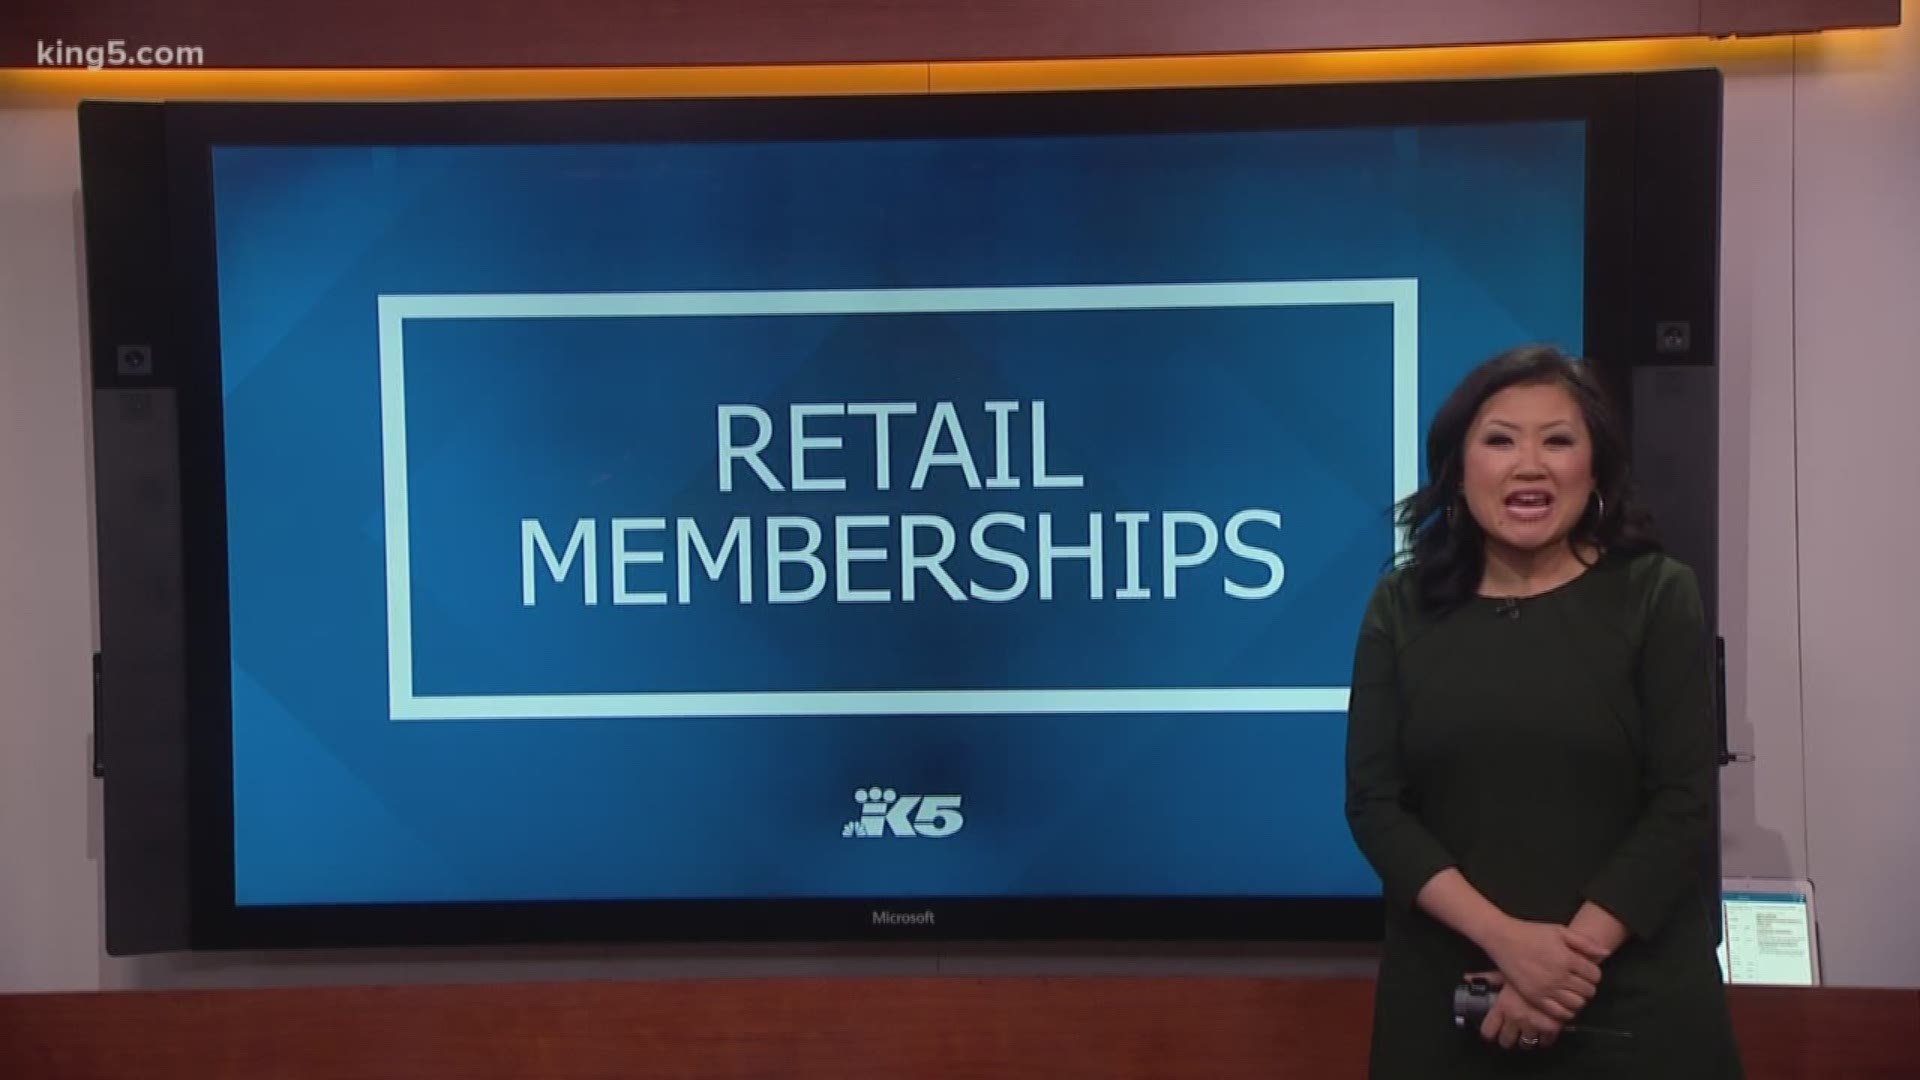 It seems like every retailer nowadays offers some type of subscription membership.  Michelle Li analyzes if they're worth the cost of entry.